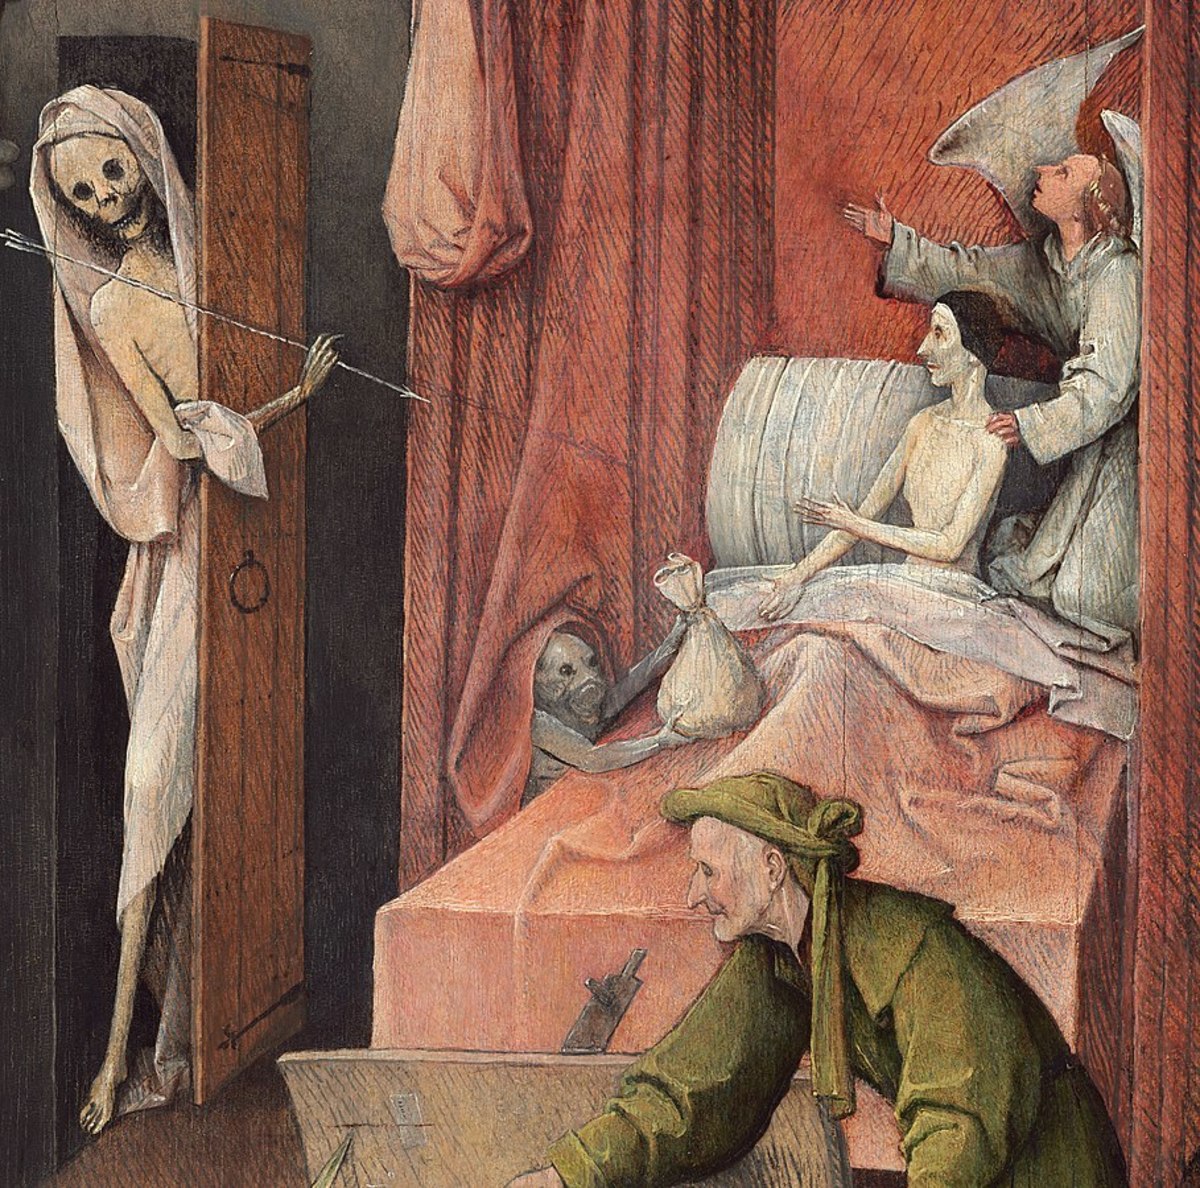 The Nightmare Visions of Hieronymous Bosch